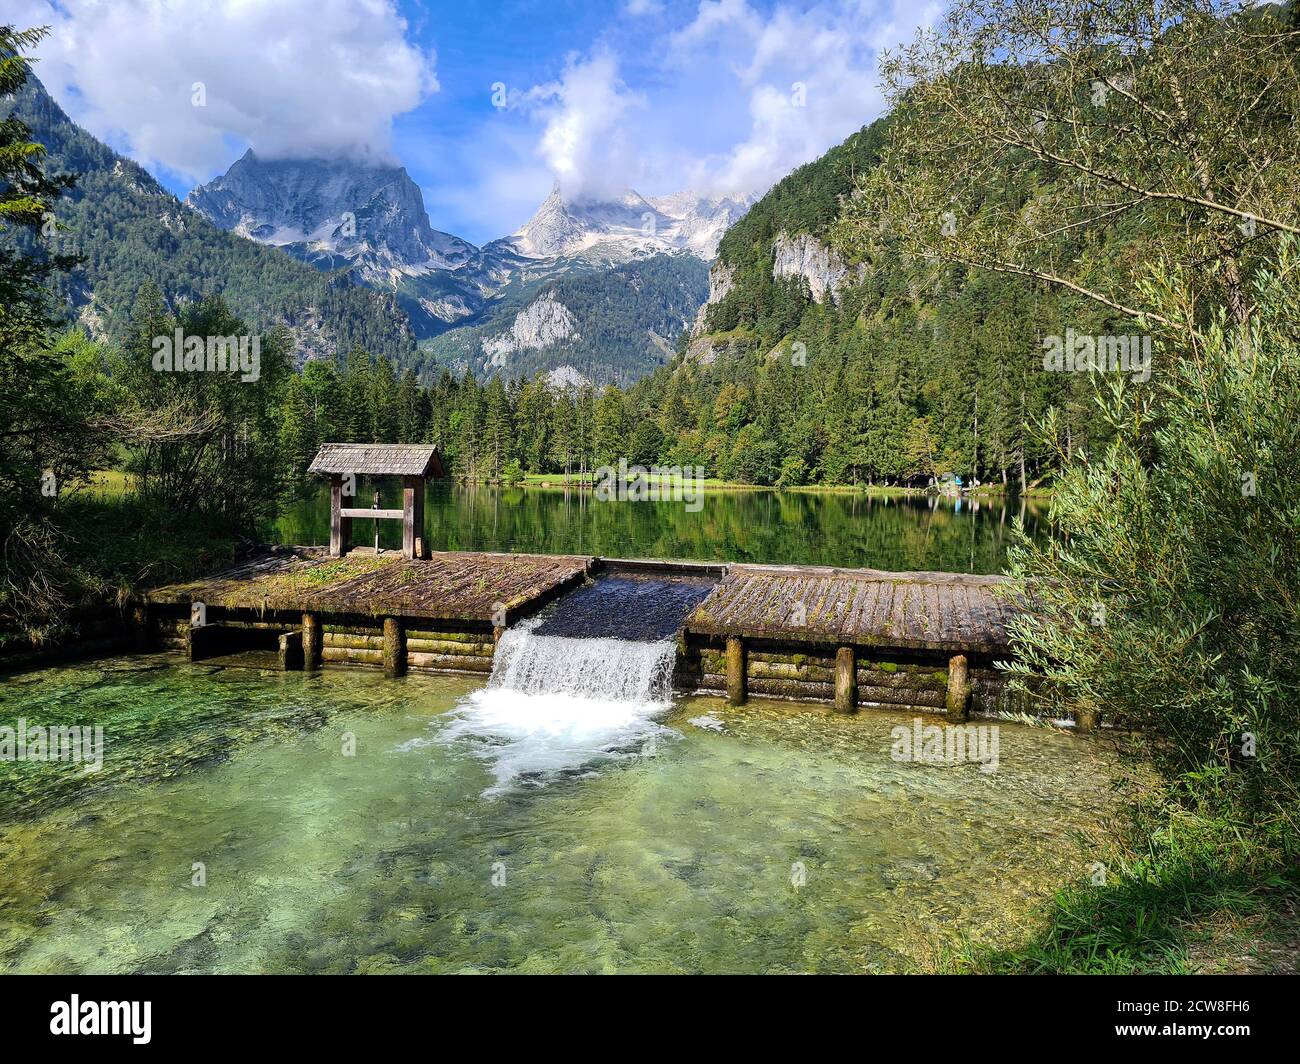 Austria, weir on the small lake called Schiederweiher in the Kalkalpen National Park which was voted the most beautiful place in Austria in 2019, loca Stock Photo